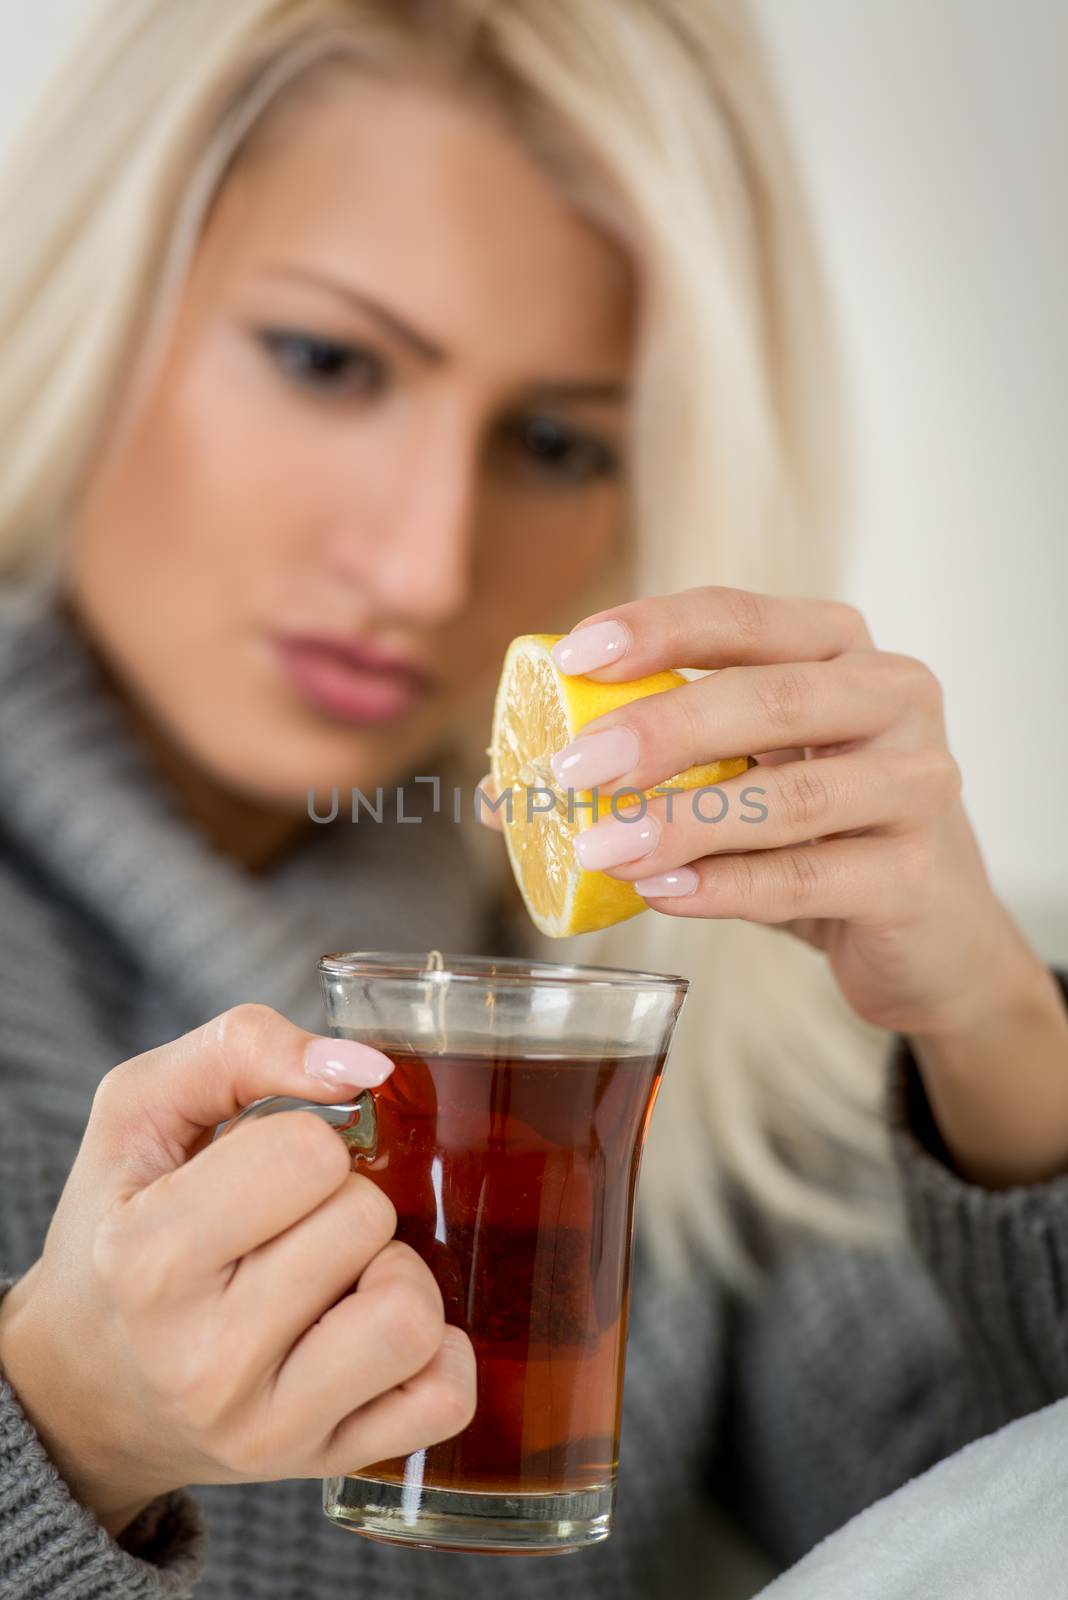 Beautiful girl with face out of focus squeezed lemon in a cup of tea. In the foreground are tea and lemon.